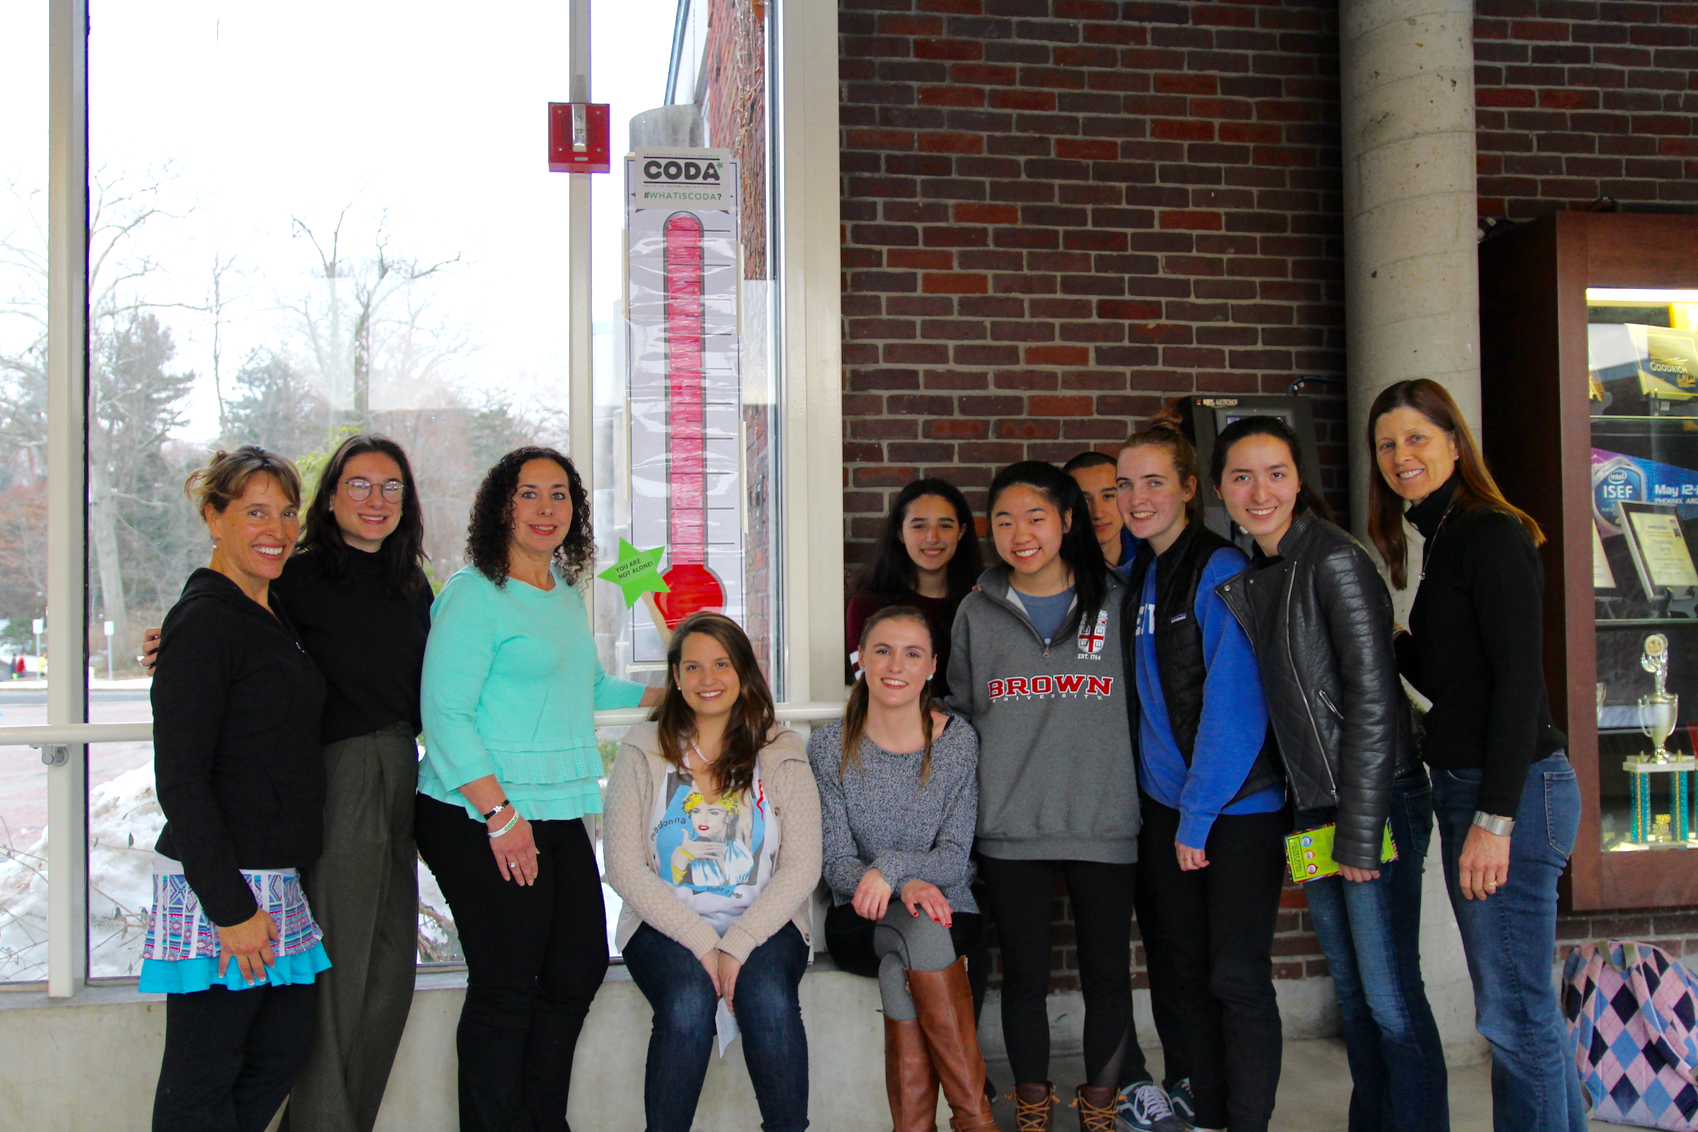 Outreach advisor Amy Badini, Rebecca Lehner from Fairco Greentree Recycling, The Harris Project founder Stephanie Marquesano, Jeanette Petit, Catherine Baumgarten, GHS Outreach Club's Rosanna Neri, Jamie Yee, Matthew Gesell, Claire Hacker, Monique Nikolov, and GHS health teacher Kathy Steiner standing by the "CODA thermometer" in the glass corridor at Greenwich High School. Jan 10, 2018 Photo: Leslie Yager